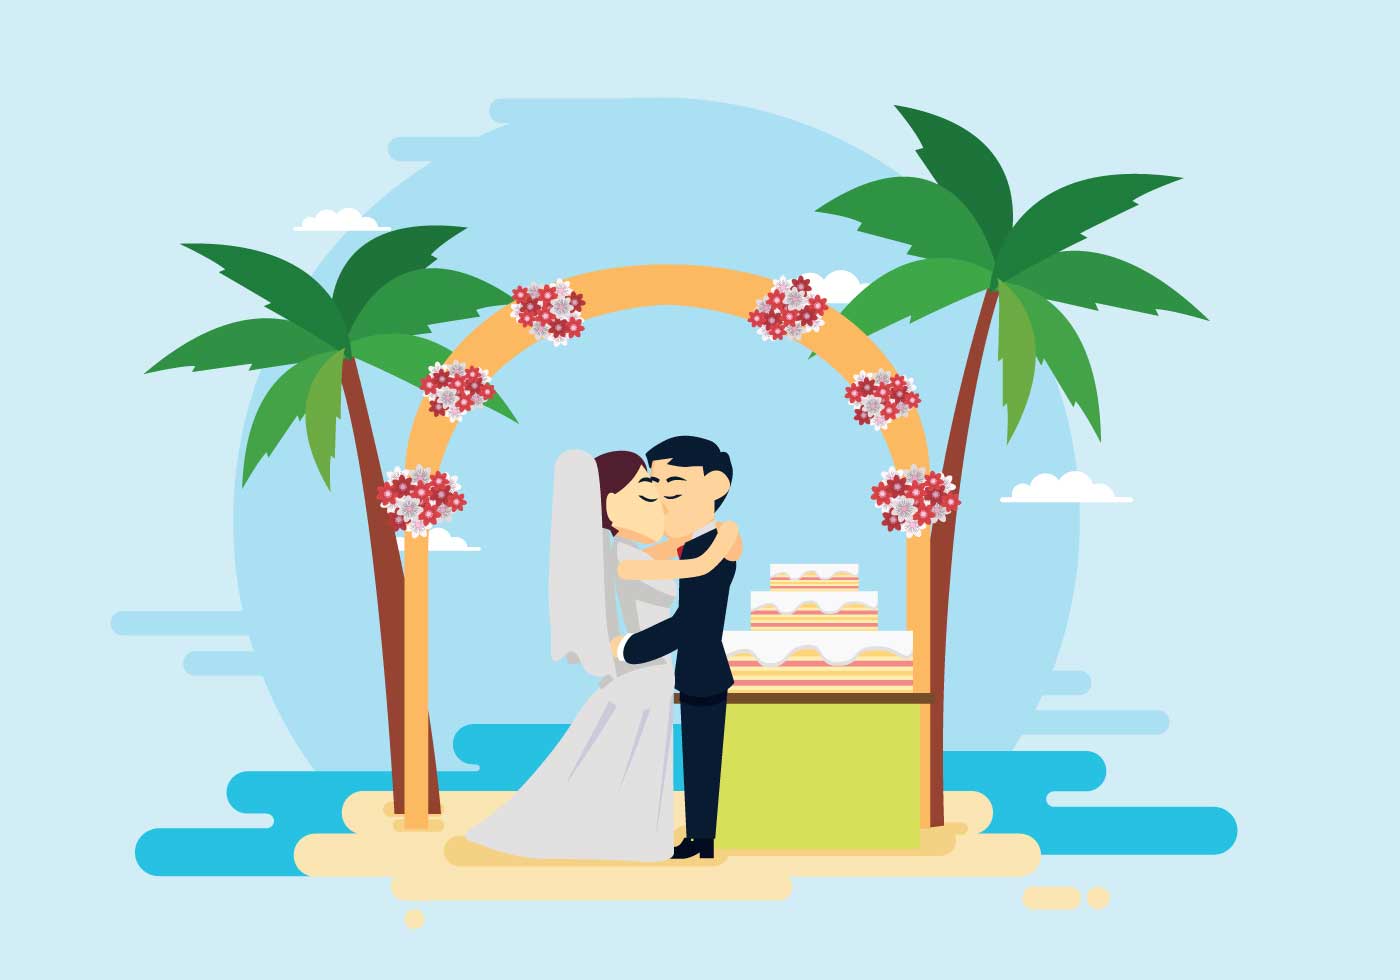 Wedding Ceremony On The Beach Illustration - Download Free ...